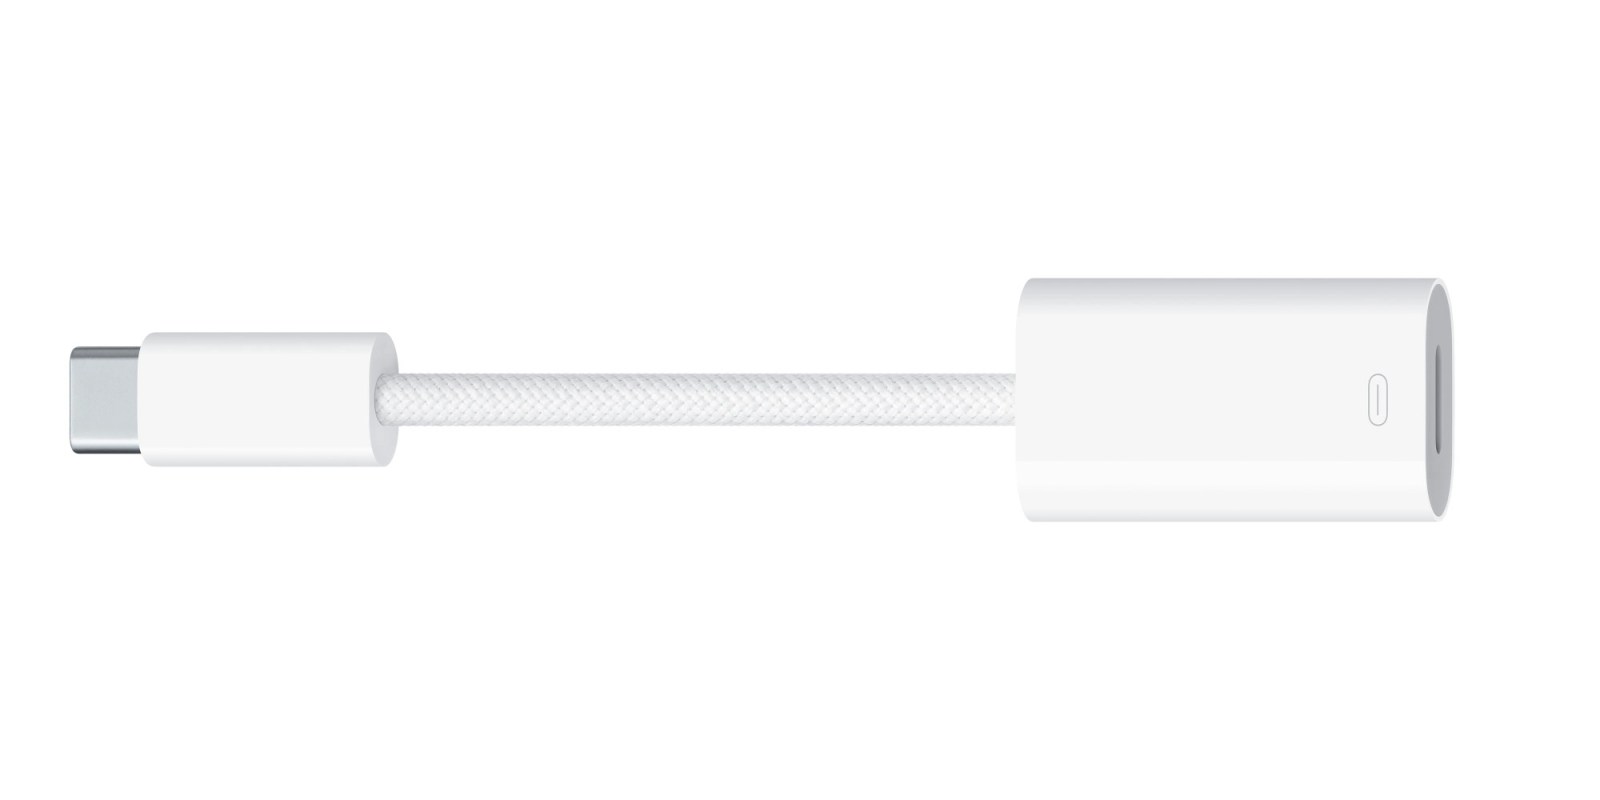 Apple selling $29 USB-C to Lightning Adapter after iPhone charging